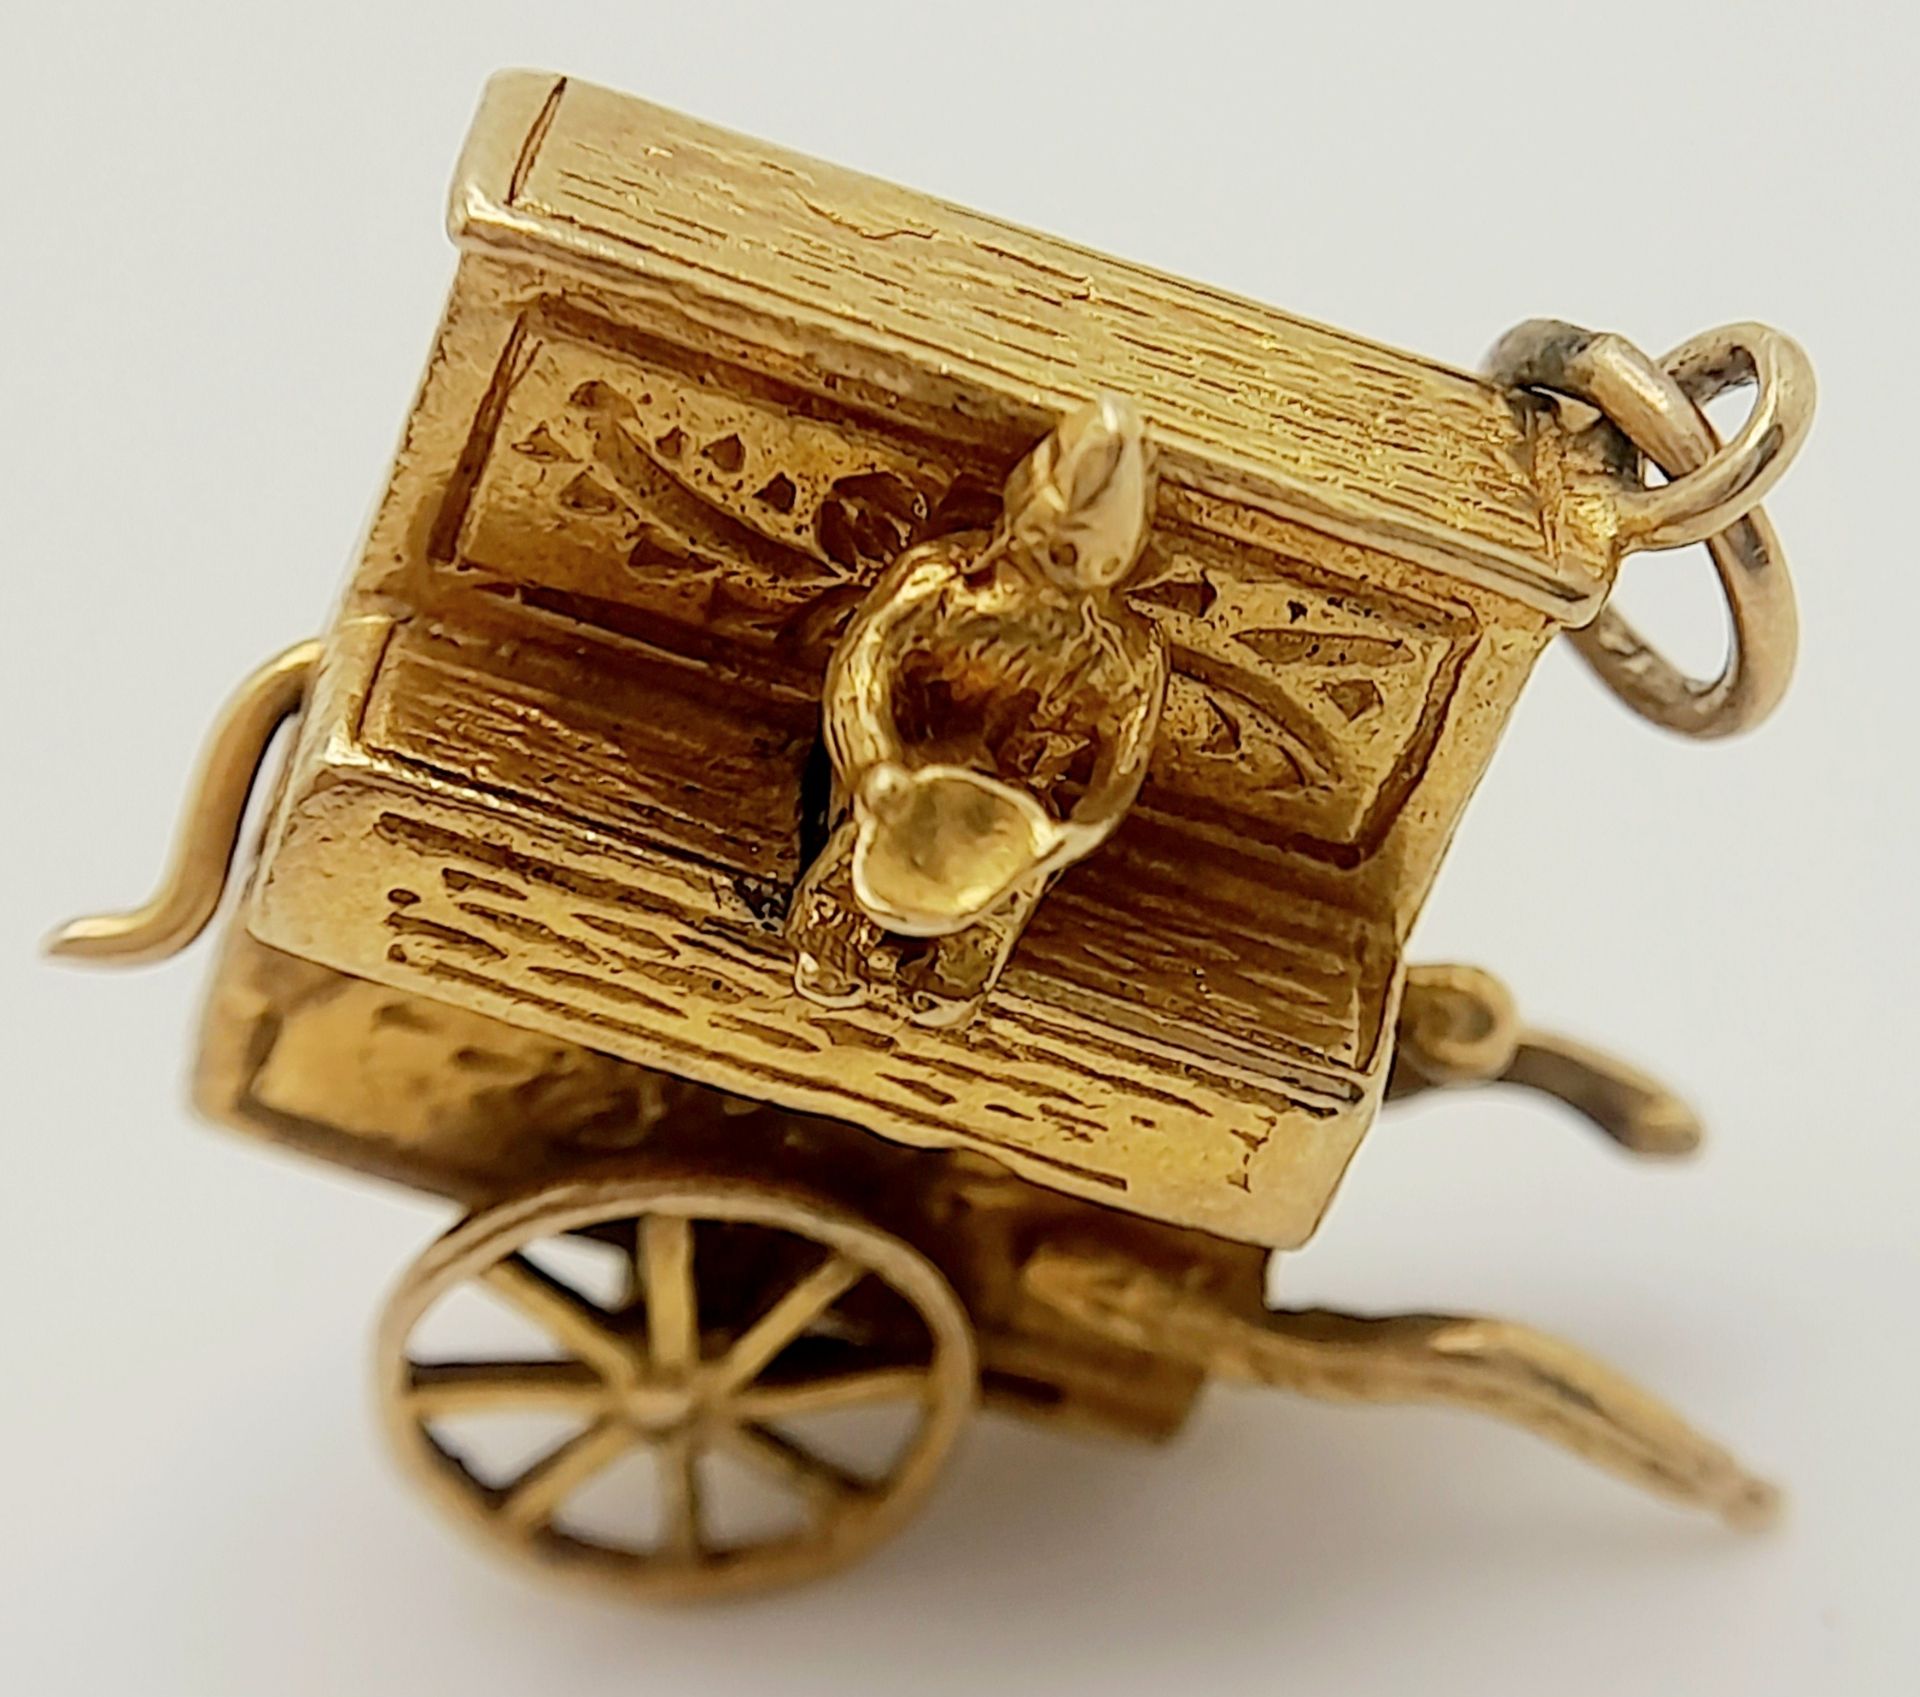 A 9K YELLOW GOLD ORGAN GRINDER AND MONKEY CHARM WITH MOVING PARTS. 2.2cm x 2.5cm, 5.2g weight. - Image 3 of 6